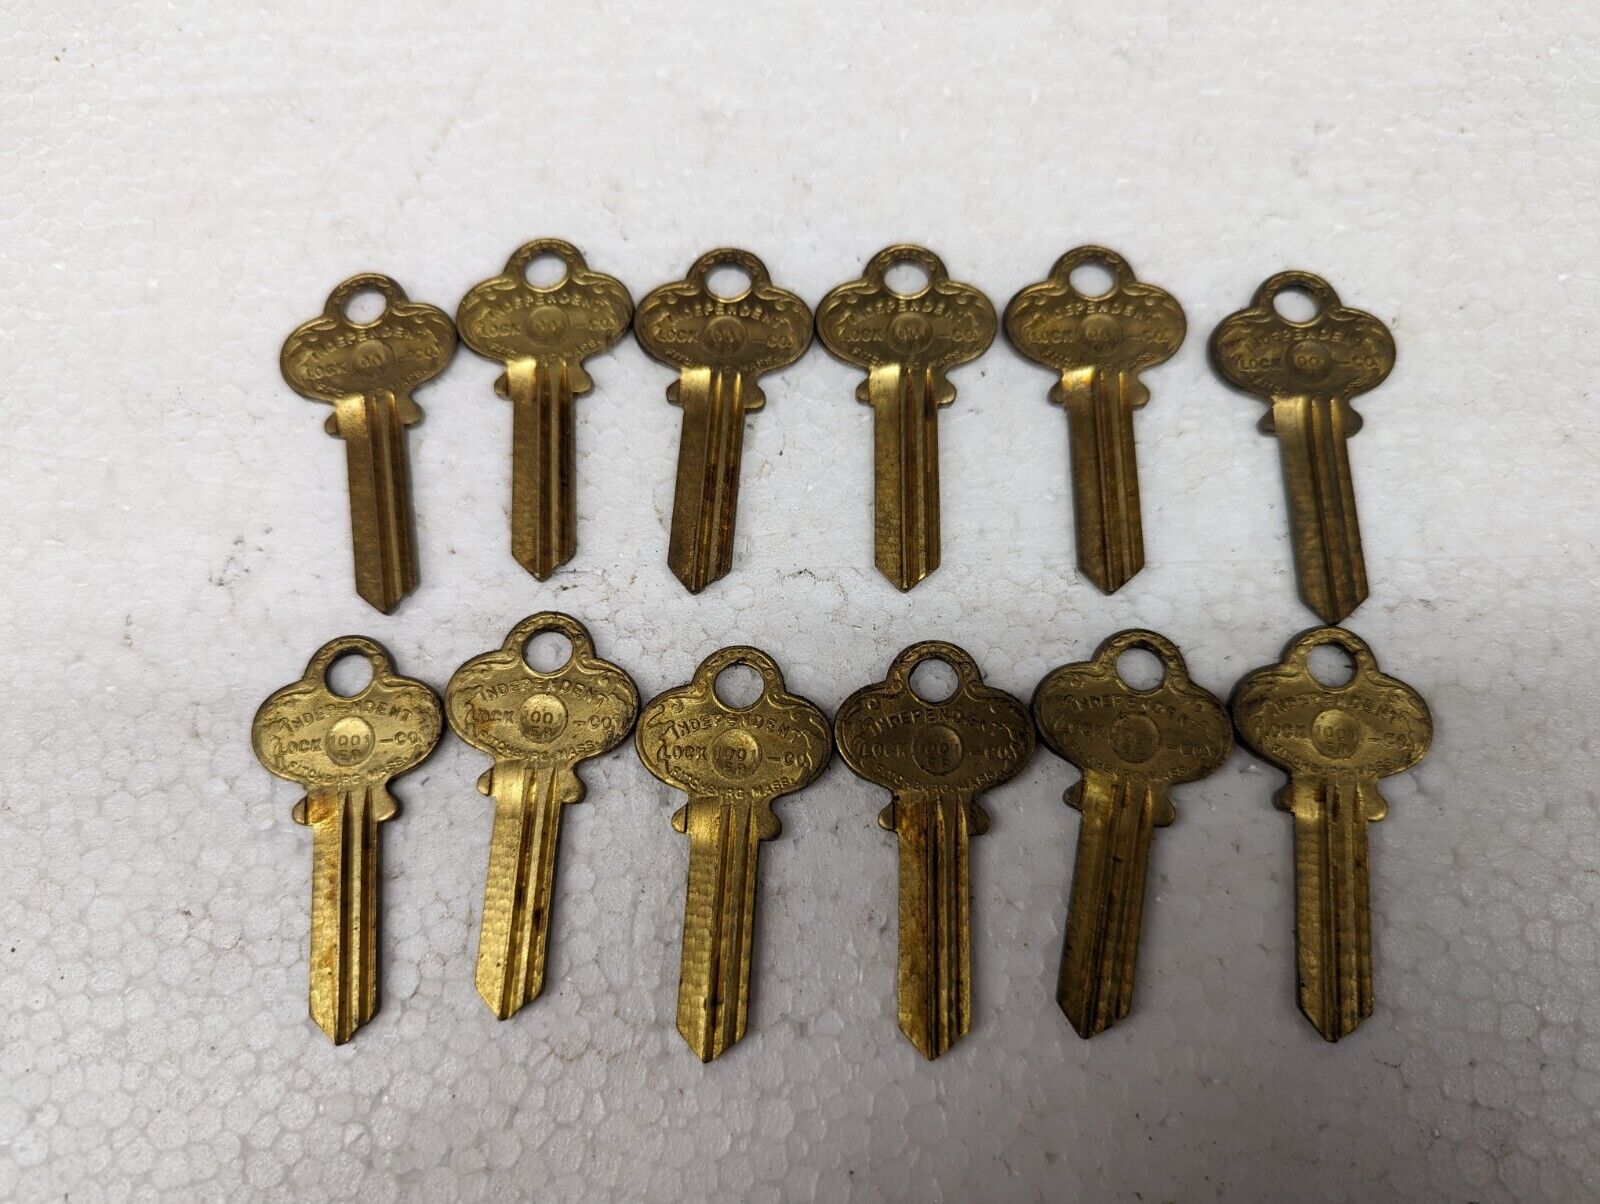 Lot of 12 Vintage Independent Lock Co/ILCO CO-3 Key Blanks, 5-Pin, Uncut USA